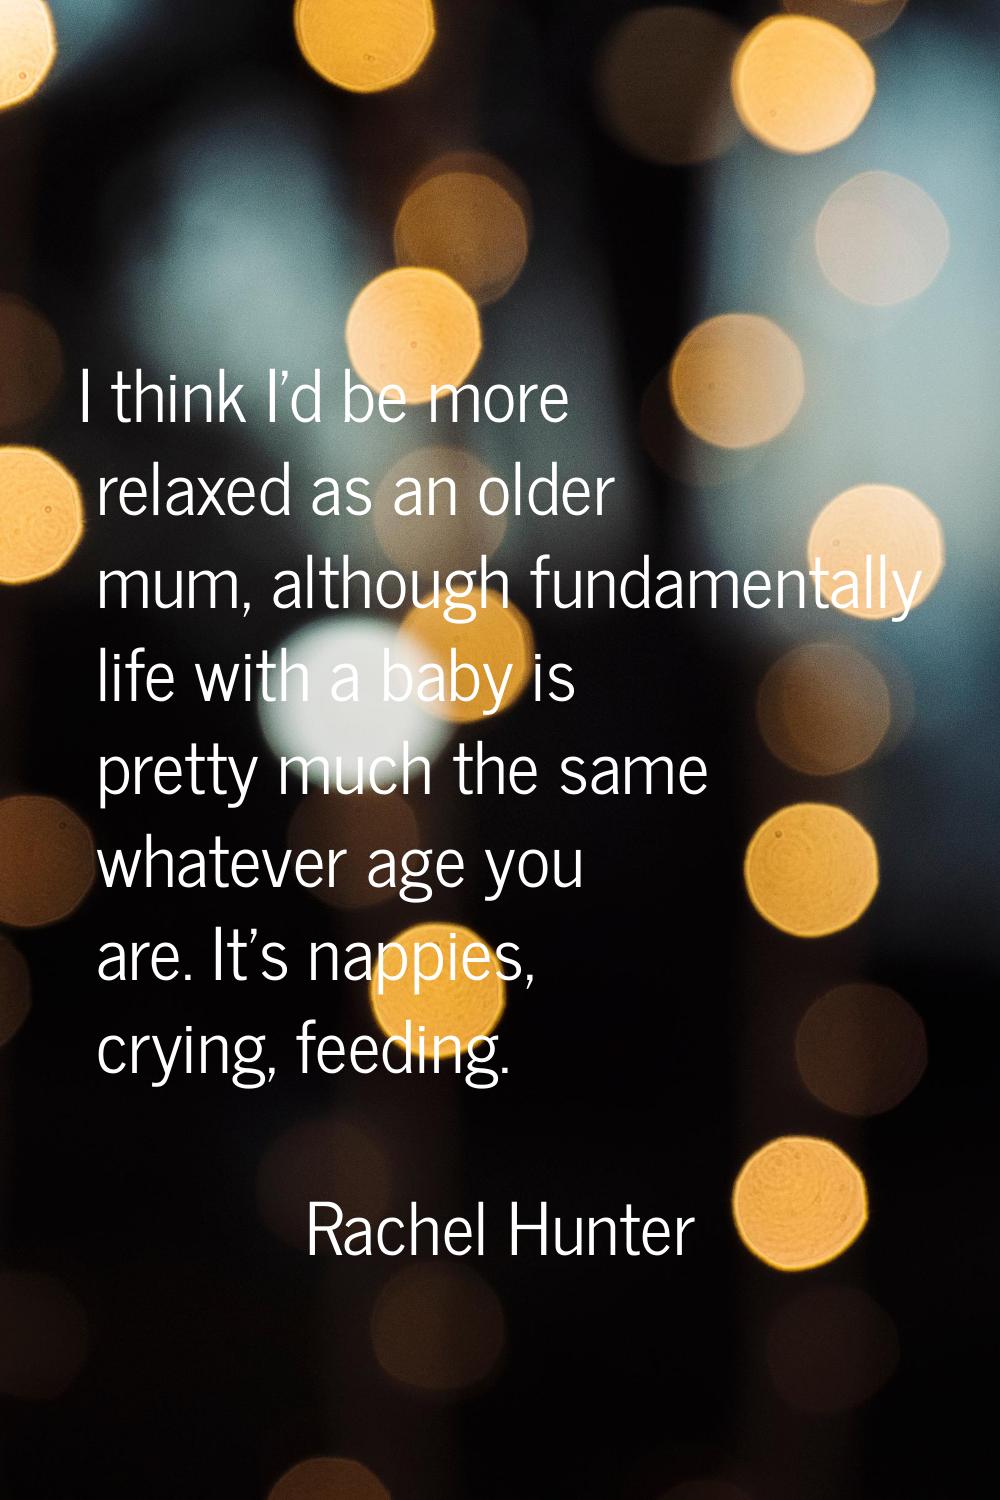 I think I'd be more relaxed as an older mum, although fundamentally life with a baby is pretty much